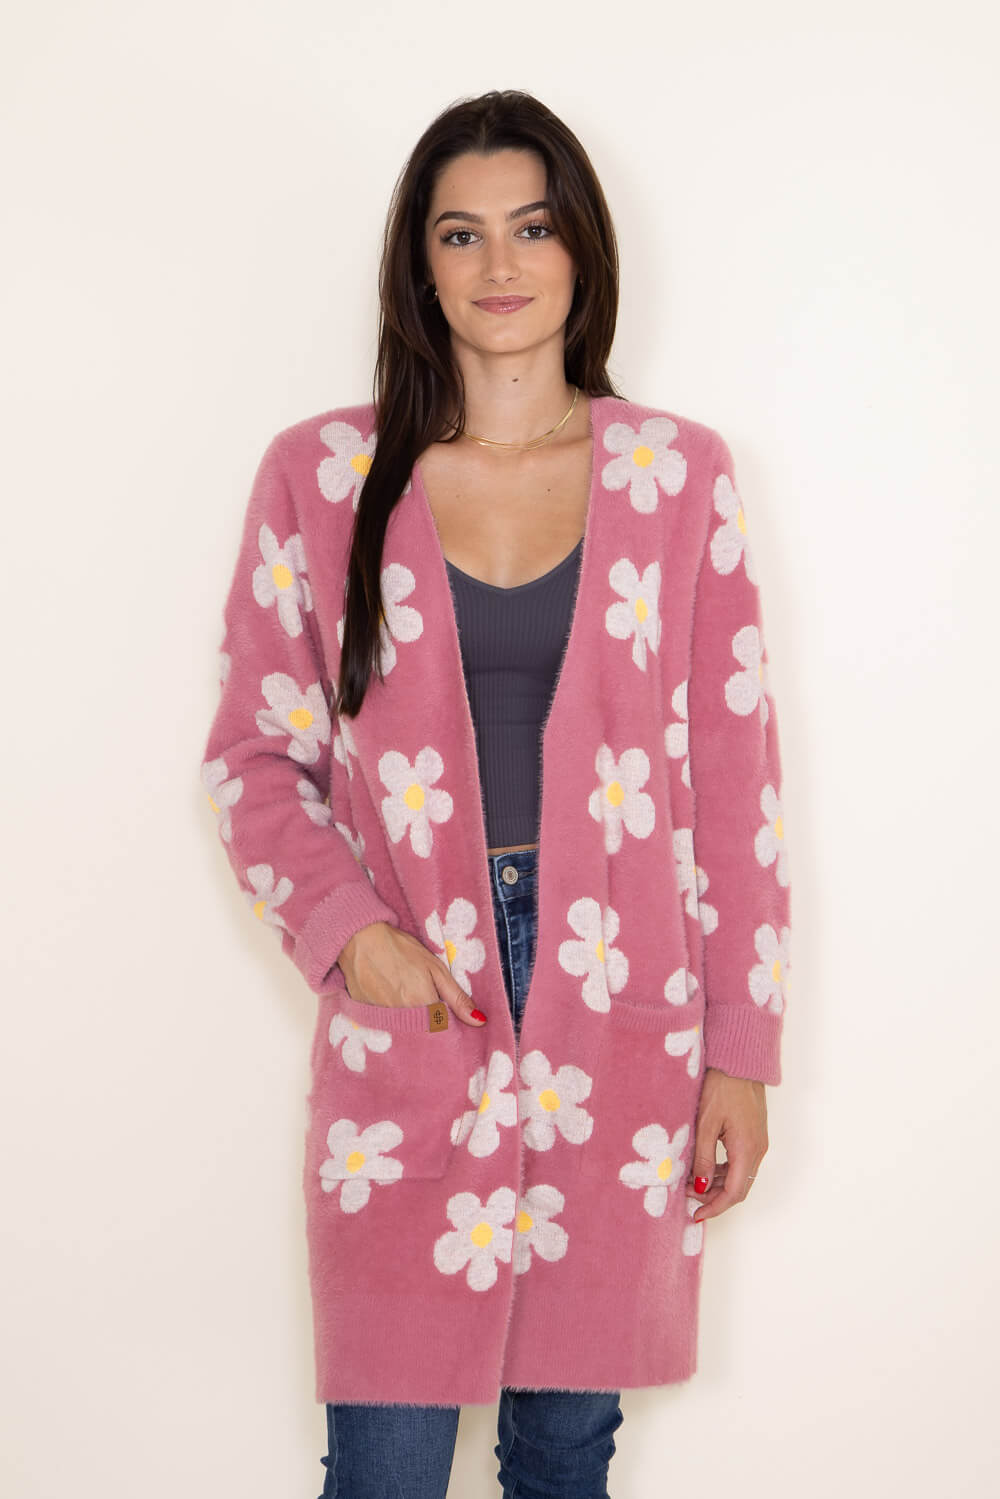 Simply Southern Fuzzy Daisy Print Long Cardigan for Women in Pink